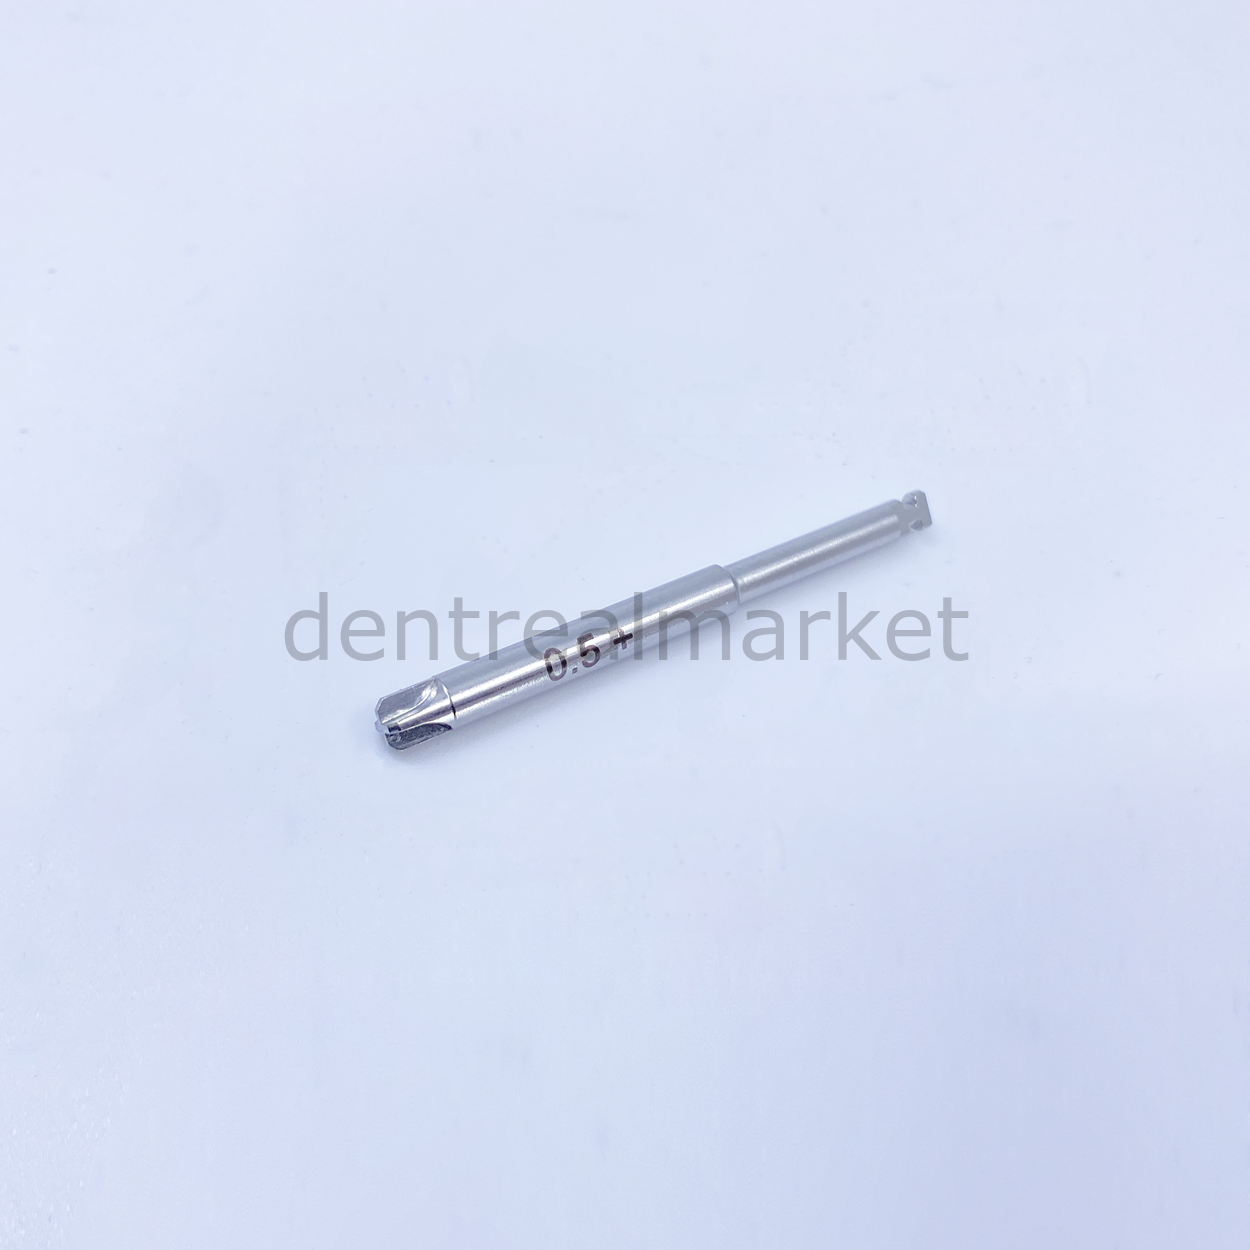 DentrealStore - Dentreal Contra-angle Wrench - For Bone and Awning Screw